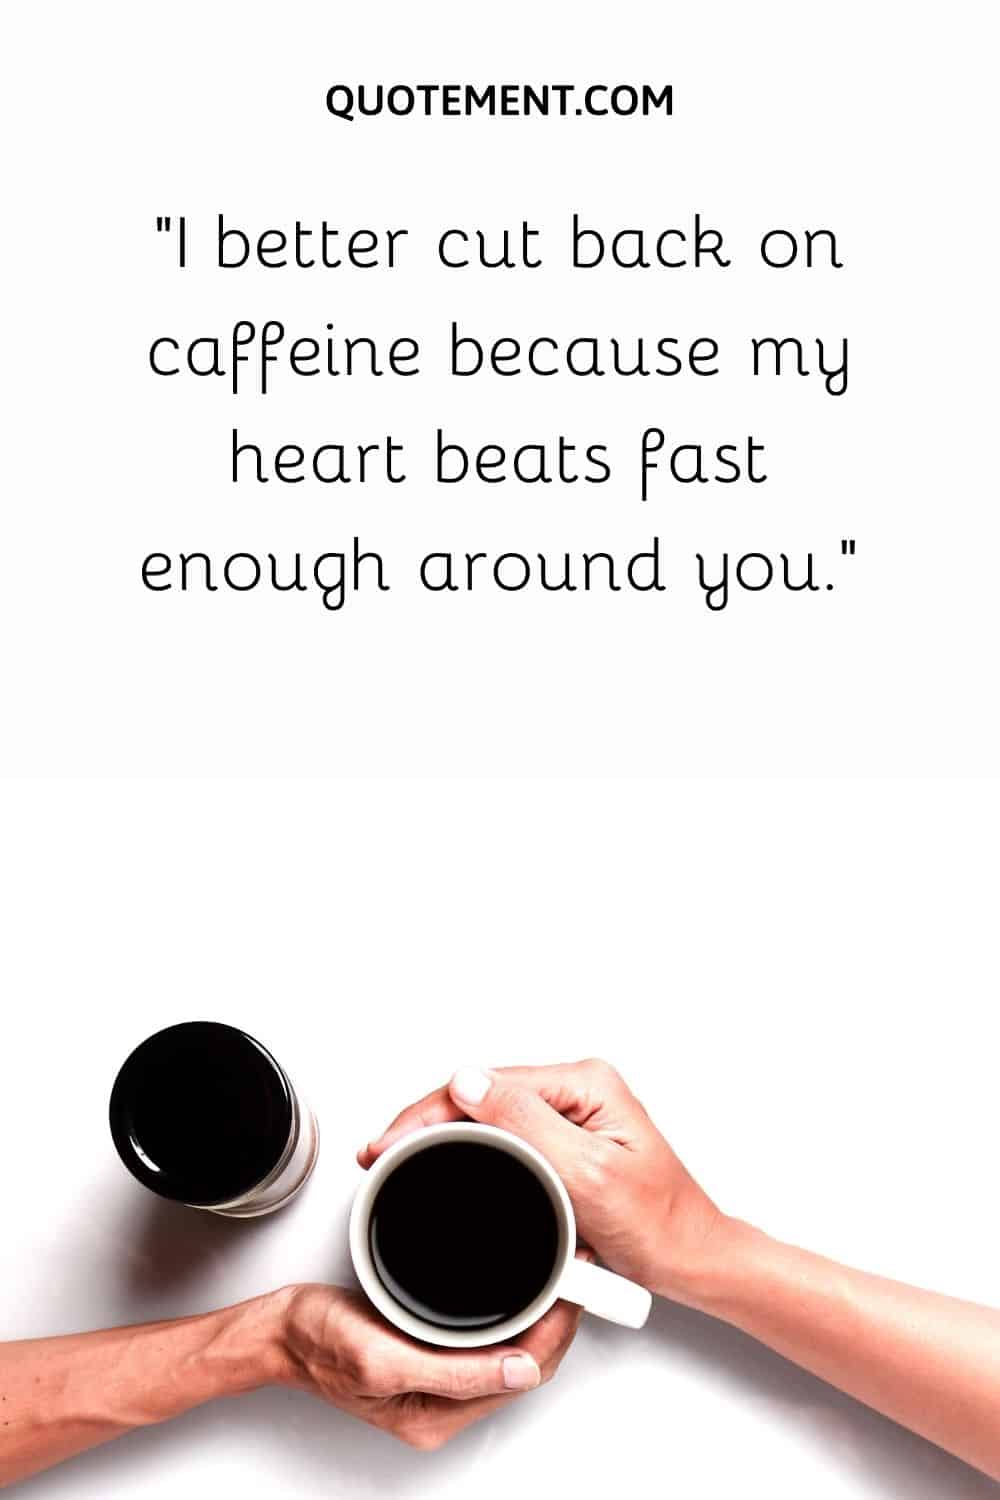 I better cut back on caffeine because my heart beats fast enough around you